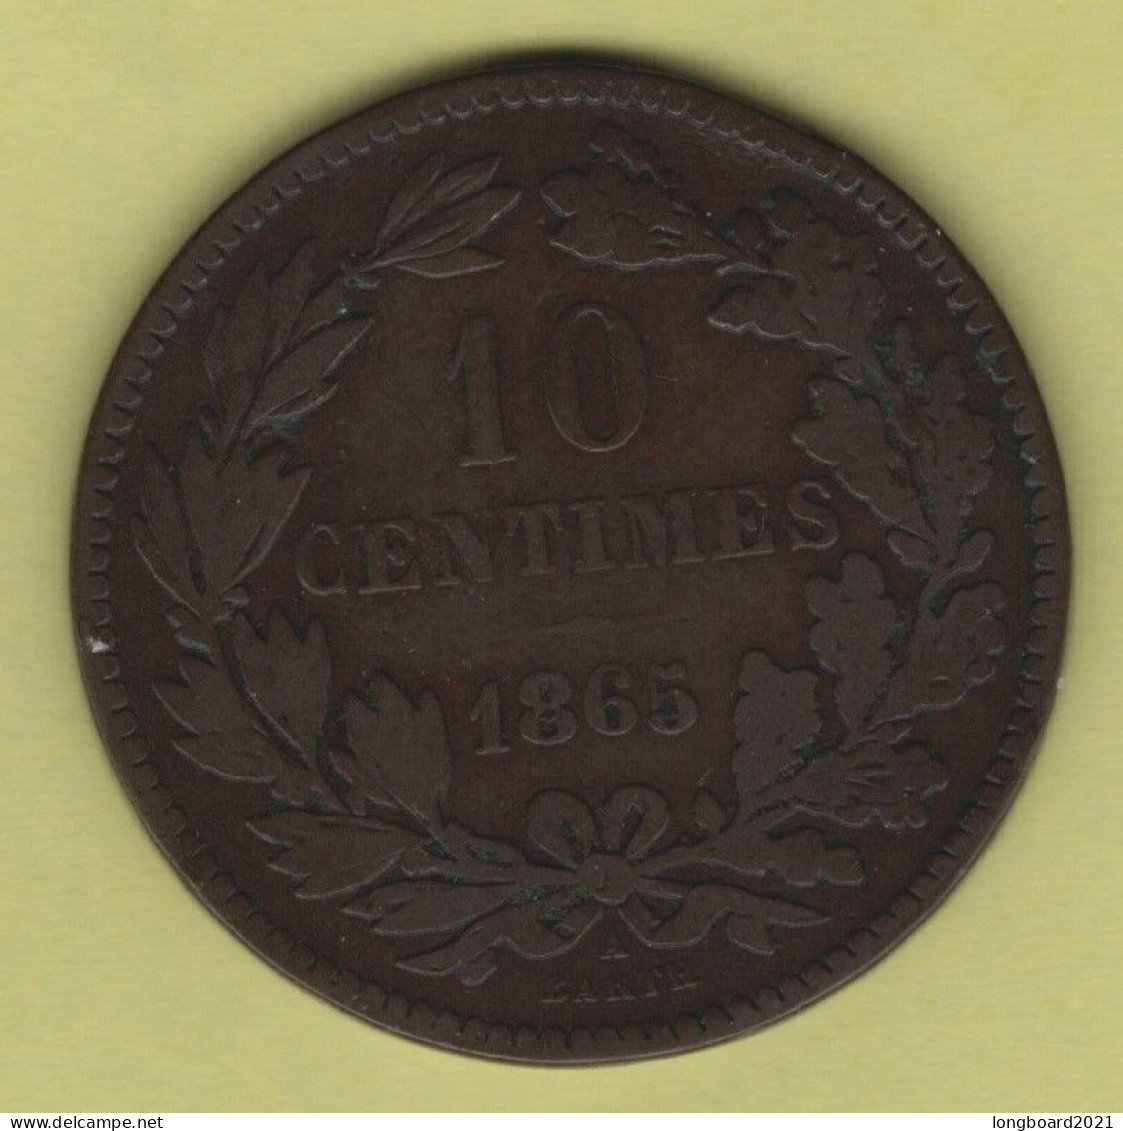 LUXEMBOURG - 10 CENTIMES 1865 - Luxemburg